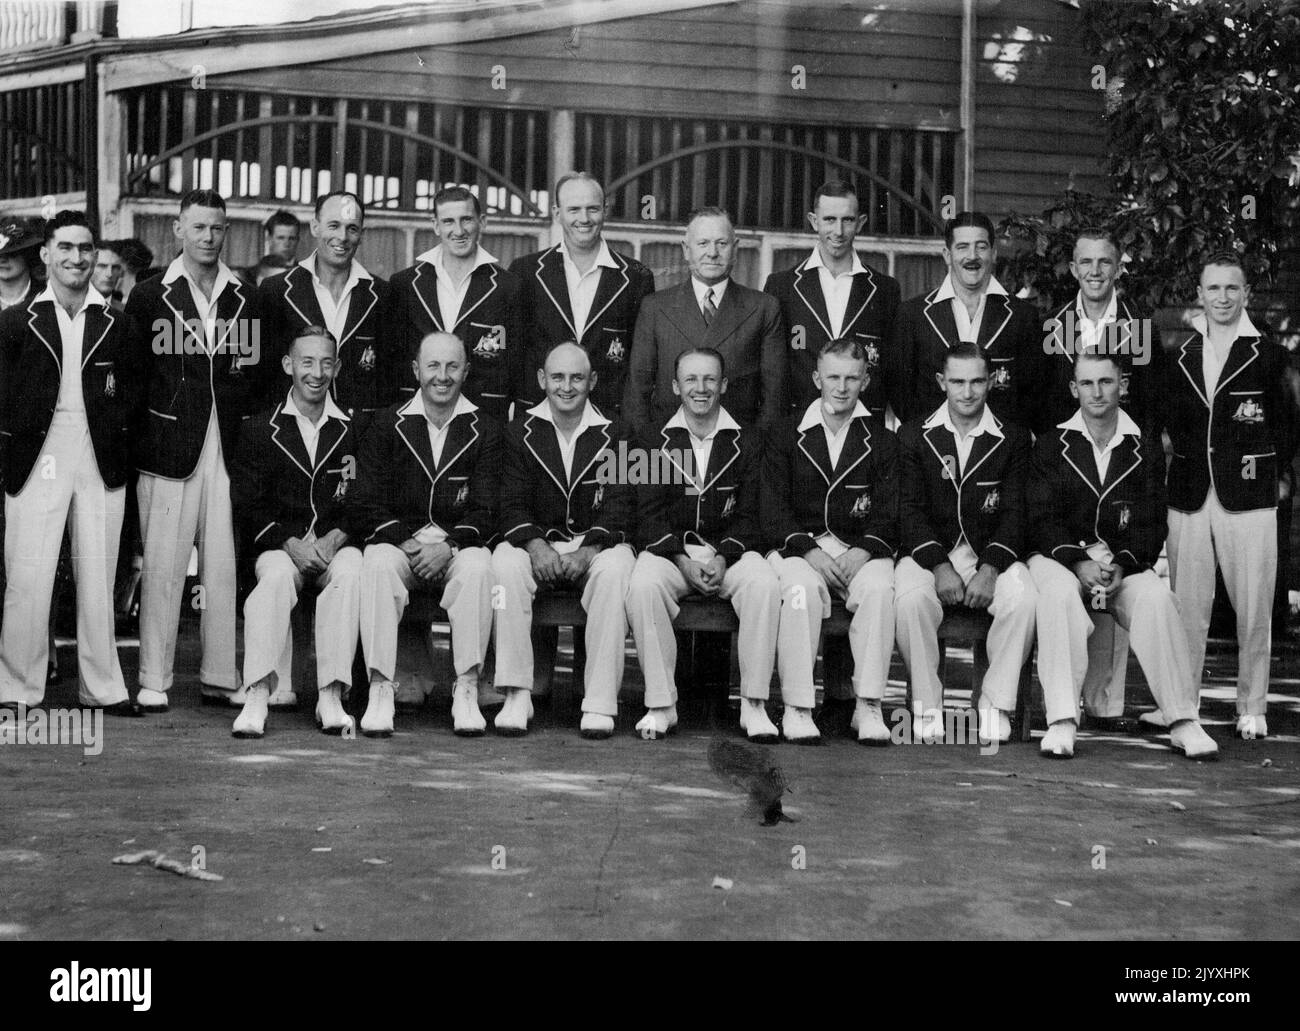 The full team of the Australian Test cricketers, taken before their match in Launceston. Standing from left: C. L. Badcock, W. A. Brown, J. H. Fingleton, E. L. McCormick, W. J. O'Reilly, W. H. Jeanes (manager), E. S. White, L. O. B. Fleetwood-Smith, F. A. Ward, C. W. Walker. Seated: A. L. Hassett, A. G. Chipperfield, S. J. McCabe, D. G. Bradman, B. A. Barnett, S. Barnes and M. G. Waite. March 01, 1938. Stock Photo